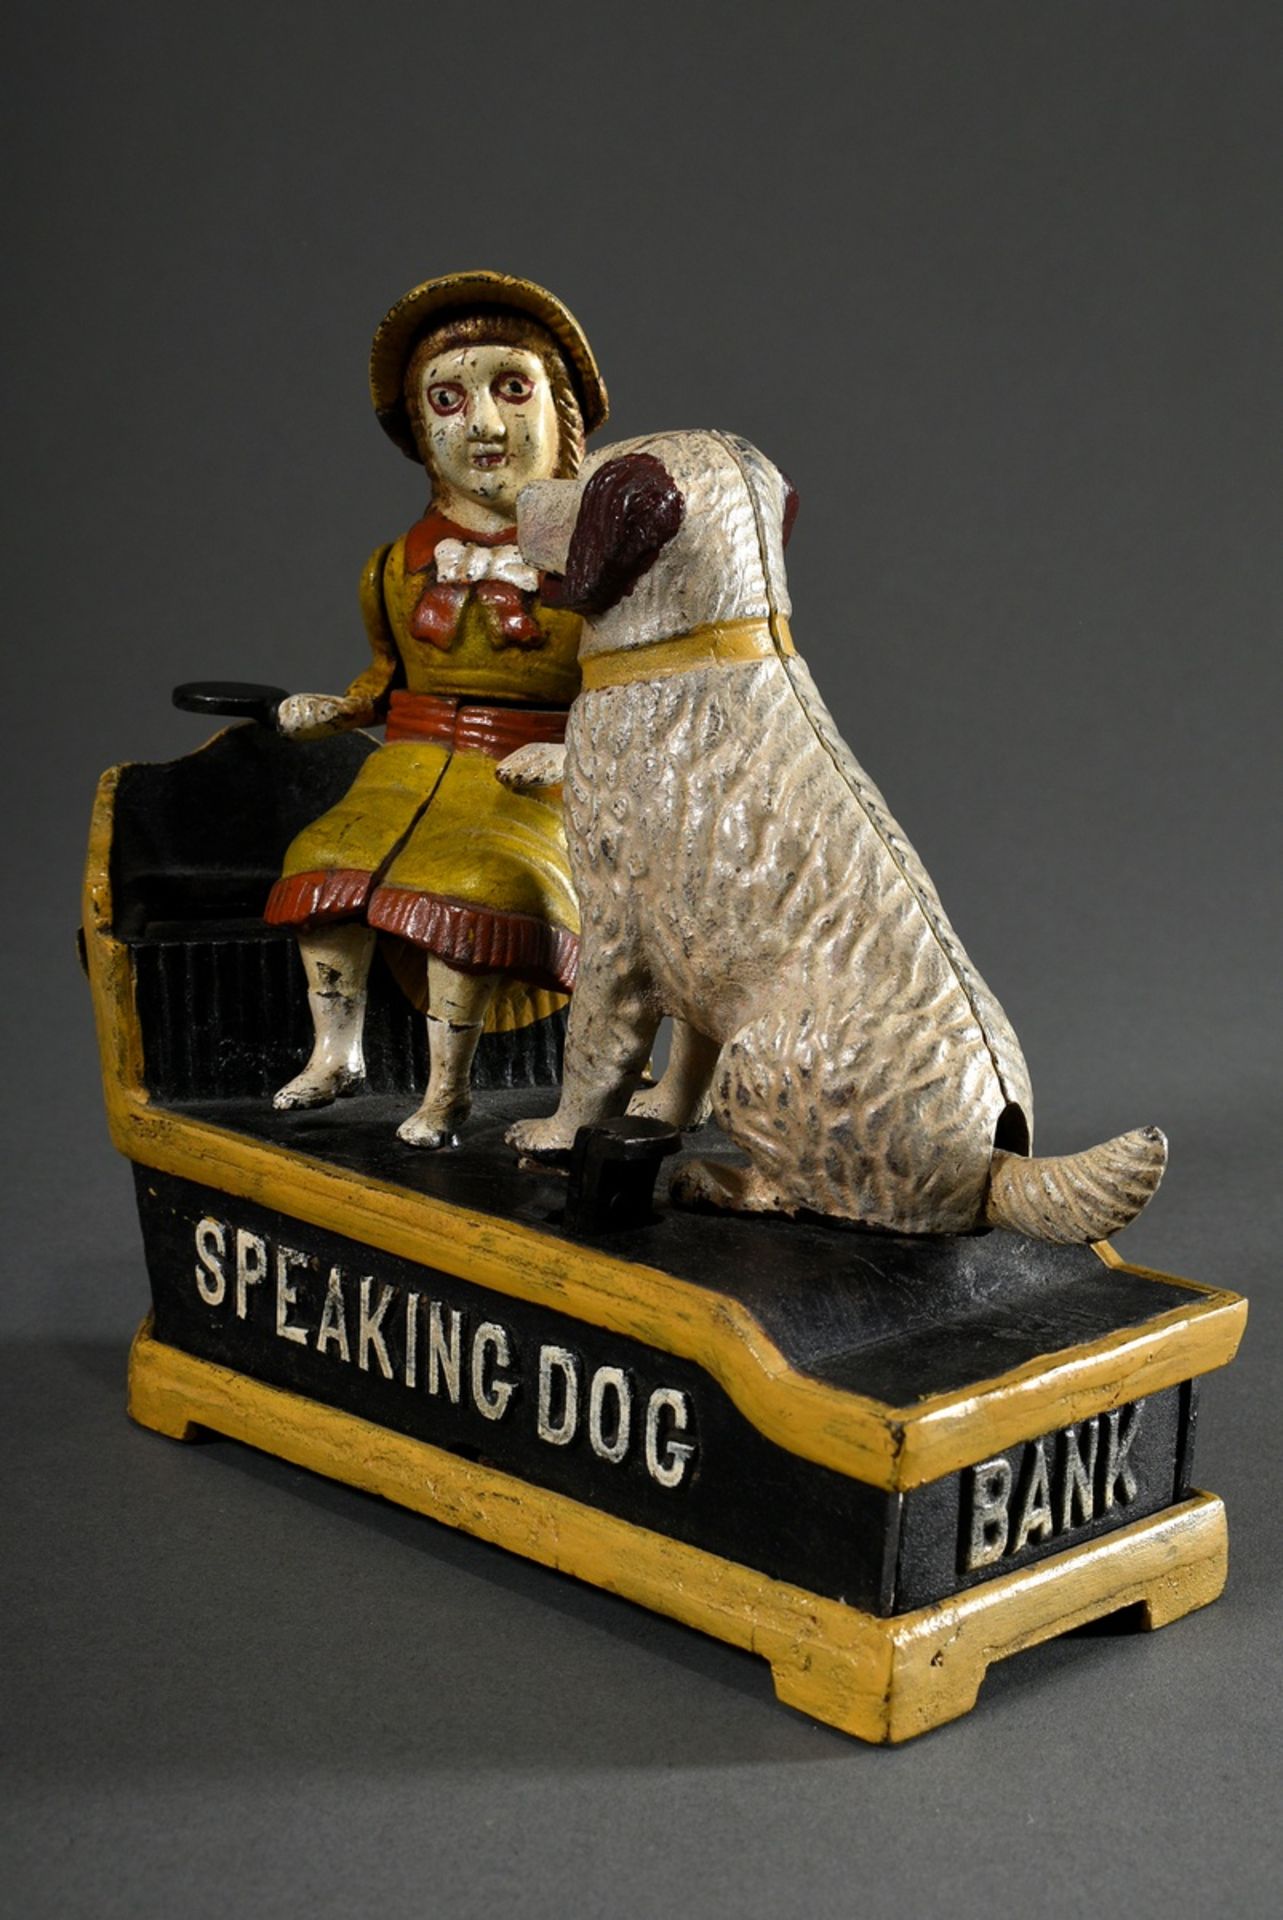 Mechanical bench "Speaking Dog", cast iron, painted, USA, probably 1st half 20th c., 18x19.5x7.8cm, - Image 2 of 6